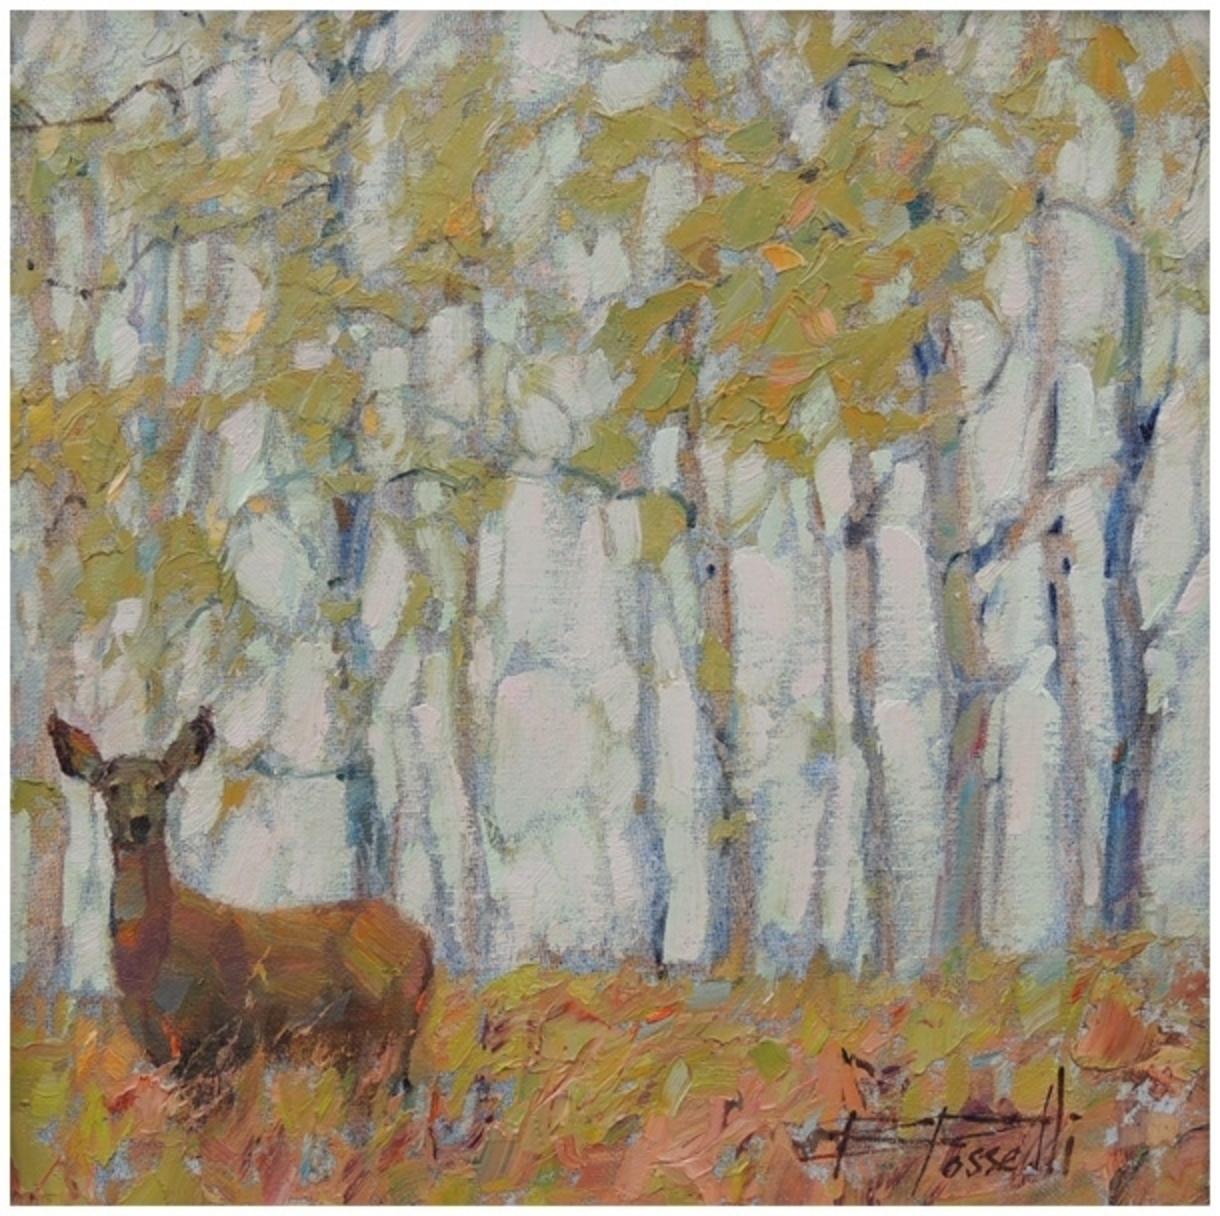 &quot;Quiet Reverie&quot; by Bonnie Posselli. Posselli may be lesser known to art collectors in Greater Yellowstone but she is one of the finest contemporary Impressionists, focused on the interior West, in America.  She is renowned for painting redrock landscapes in Utah and pastoral valleys. To learn more about her work, go to www.bonnieposselli.com